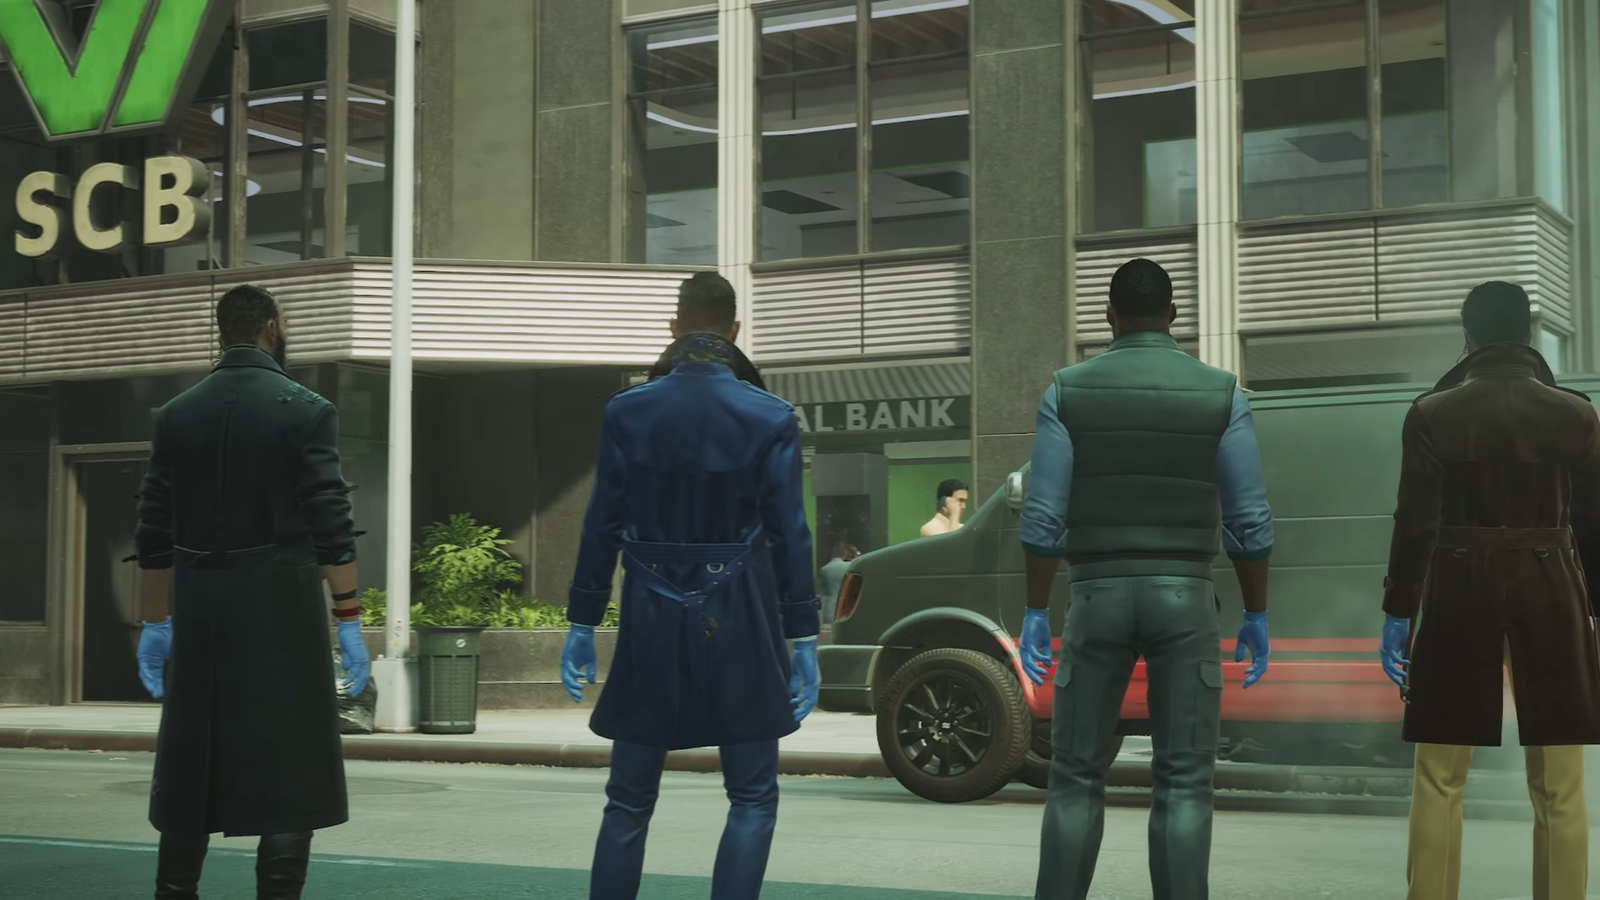 Will Payday 3 Be Crossplay? Payday 3 Gameplay, Trailer and More - News